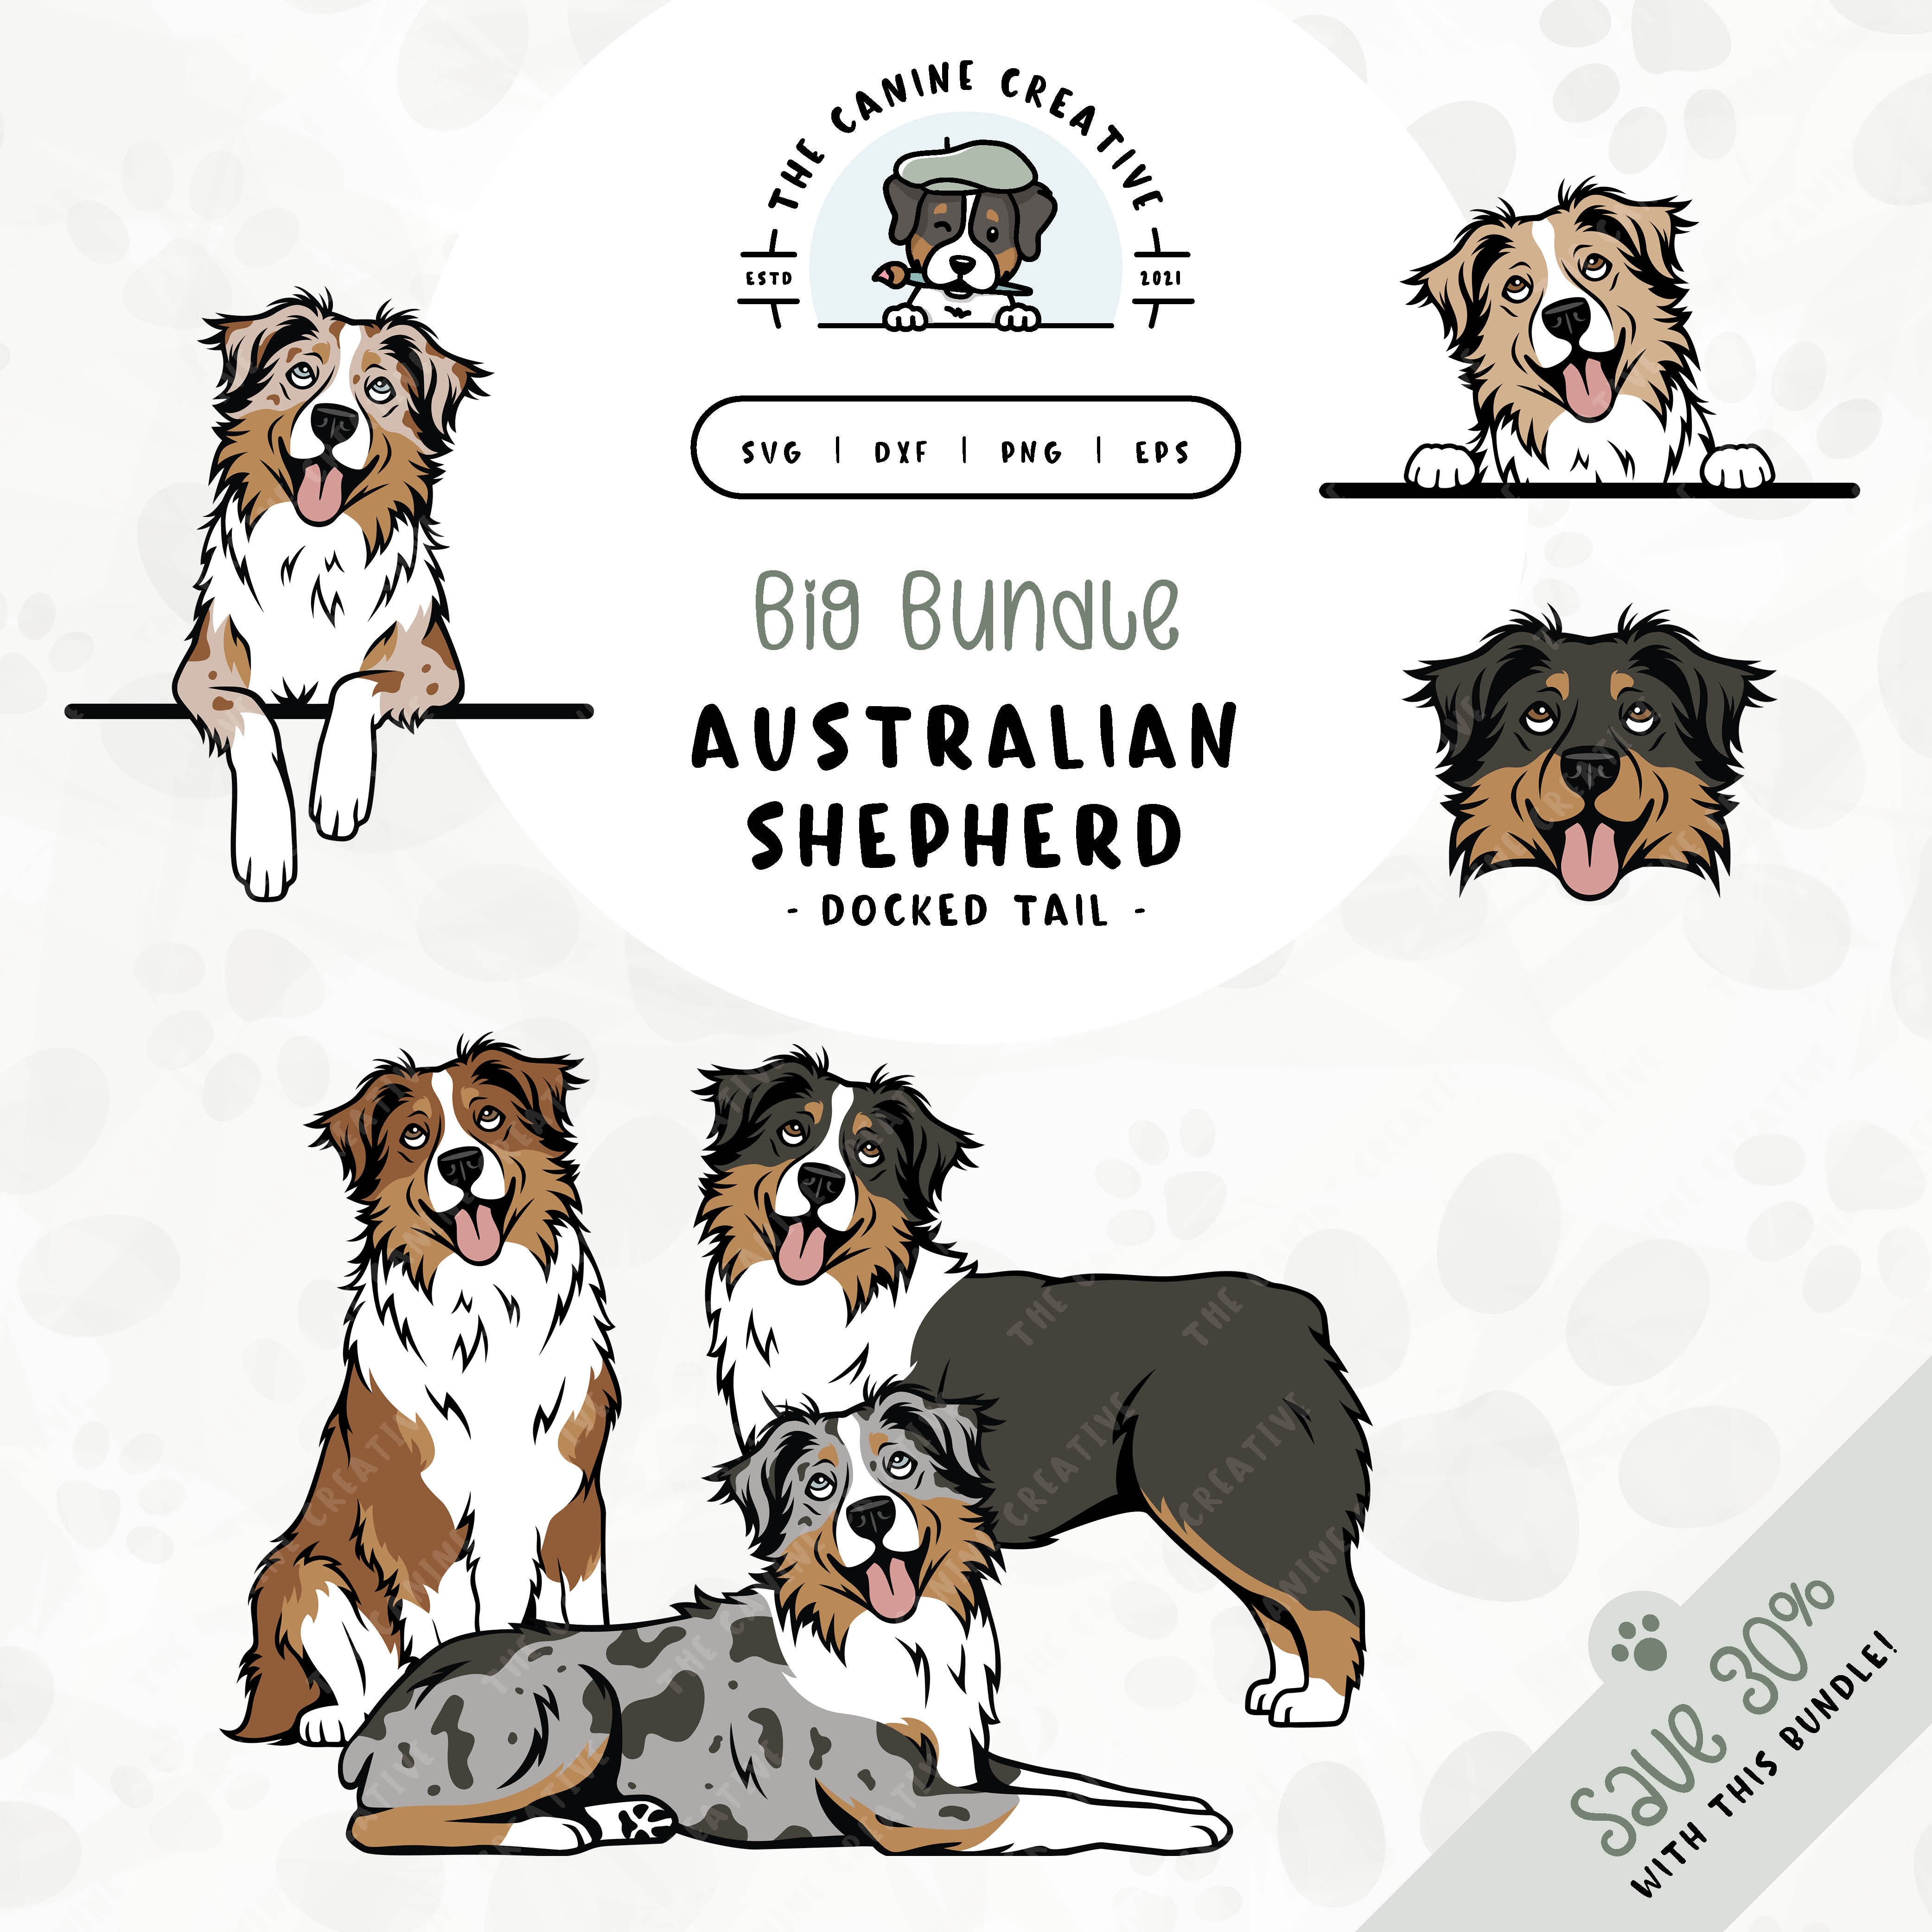 This 6-pack Australian Shepherd design bundle includes Aussie faces and five different poses: sitting, standing, laying down, and peeking (2 options). File formats include: SVG, DXF, PNG, and EPS.